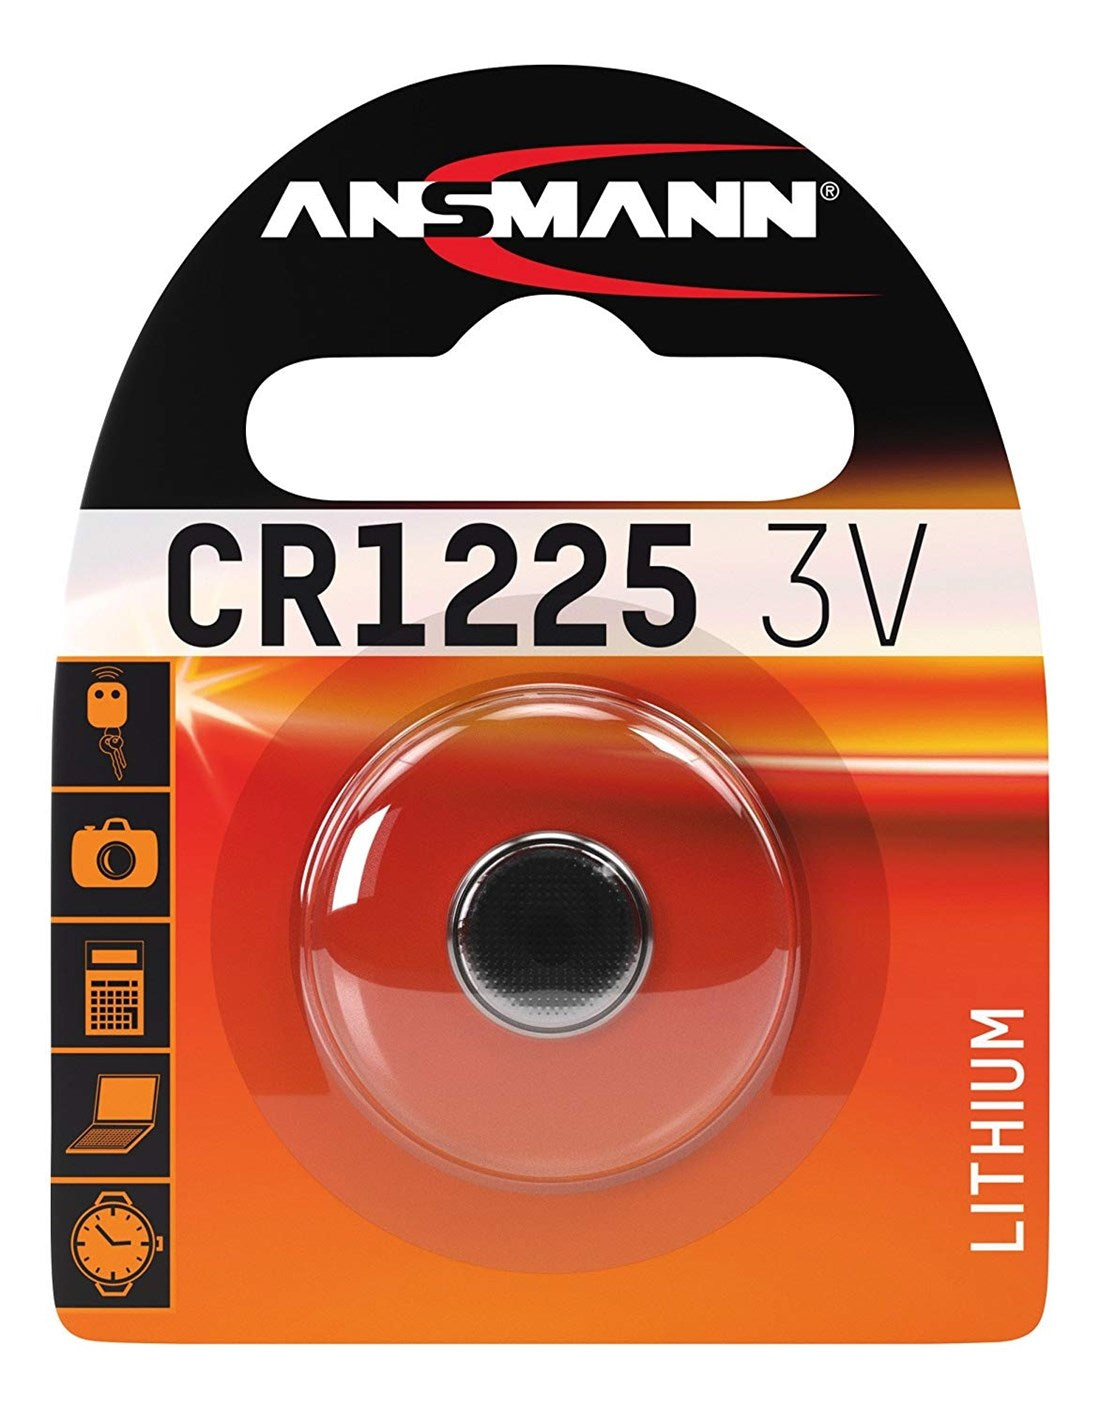 Product Image of AnSmann CR1225 3V Lithium Battery Cell (1516-0008)